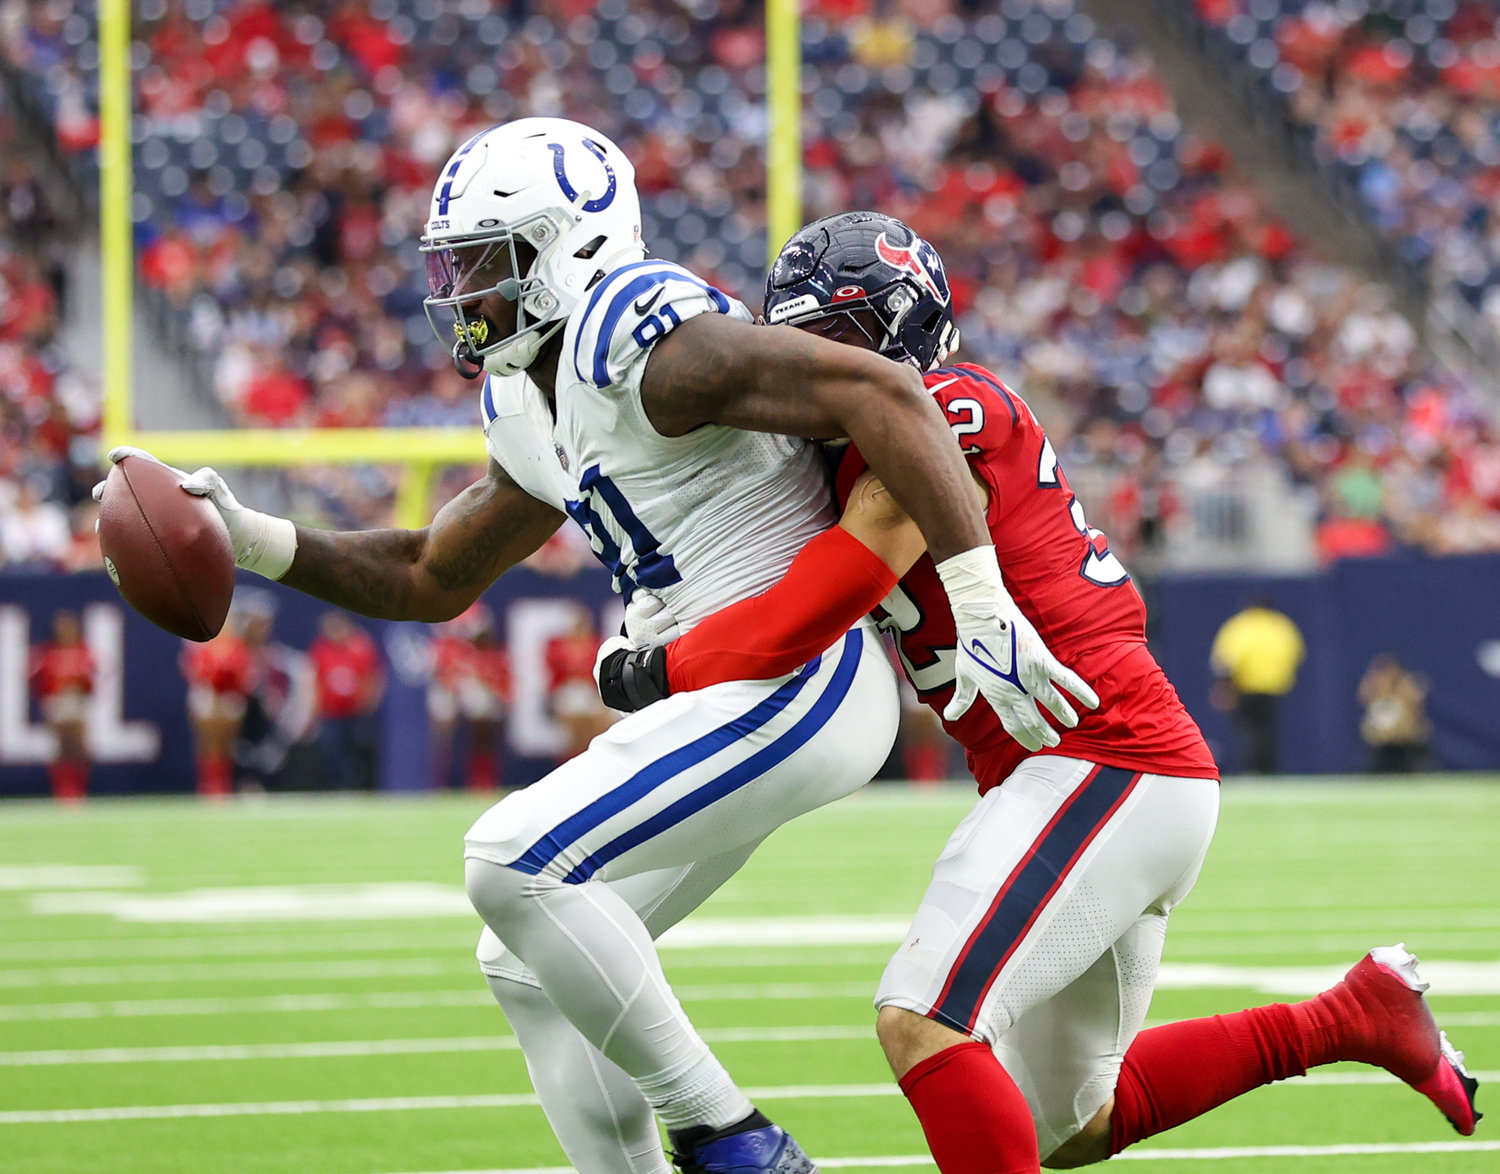 Houston Texans linebacker Garret Wallow (32) tackles Indianapolis Colts tight end Mo Alie-Cox (81) after a catch during an NFL game between the Texans and the Colts on December 5, 2021 in Houston, Texas. The Colts won, 31-0.